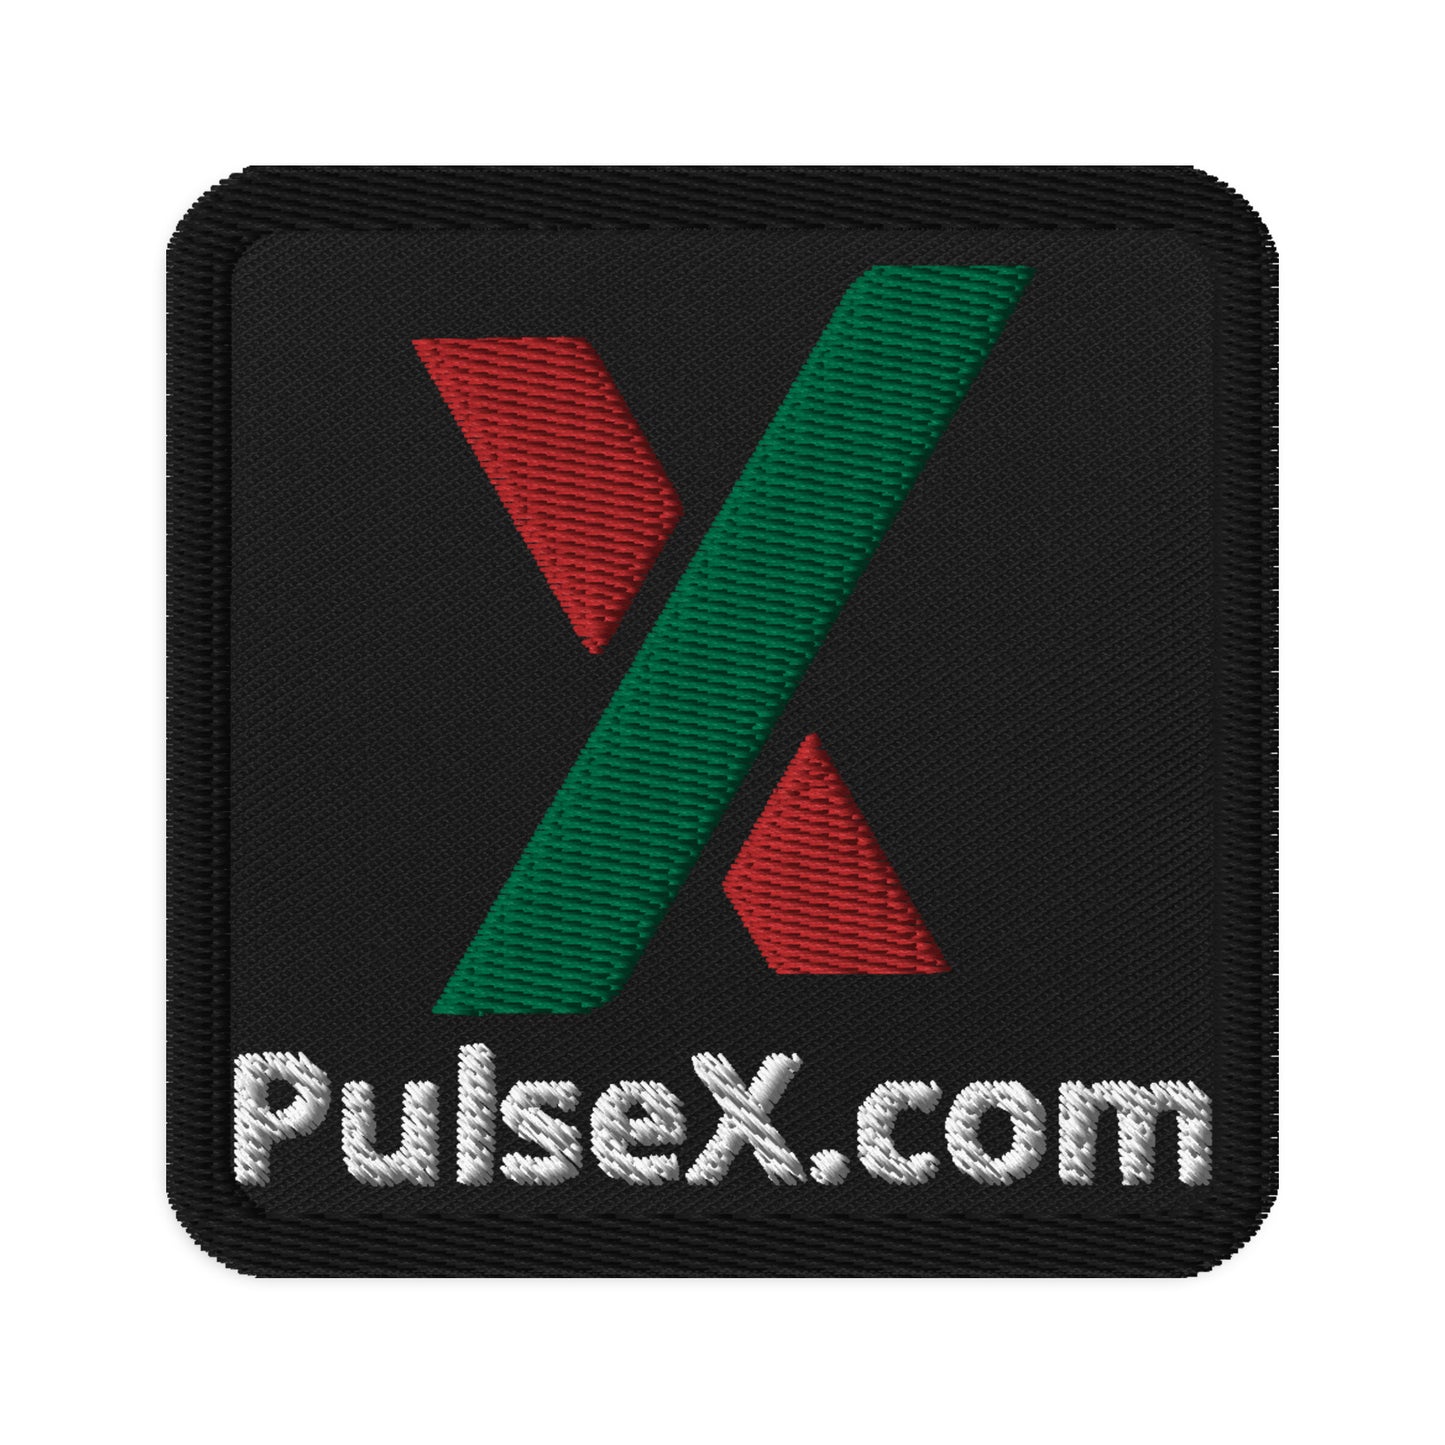 PulseX Embroidered Patch